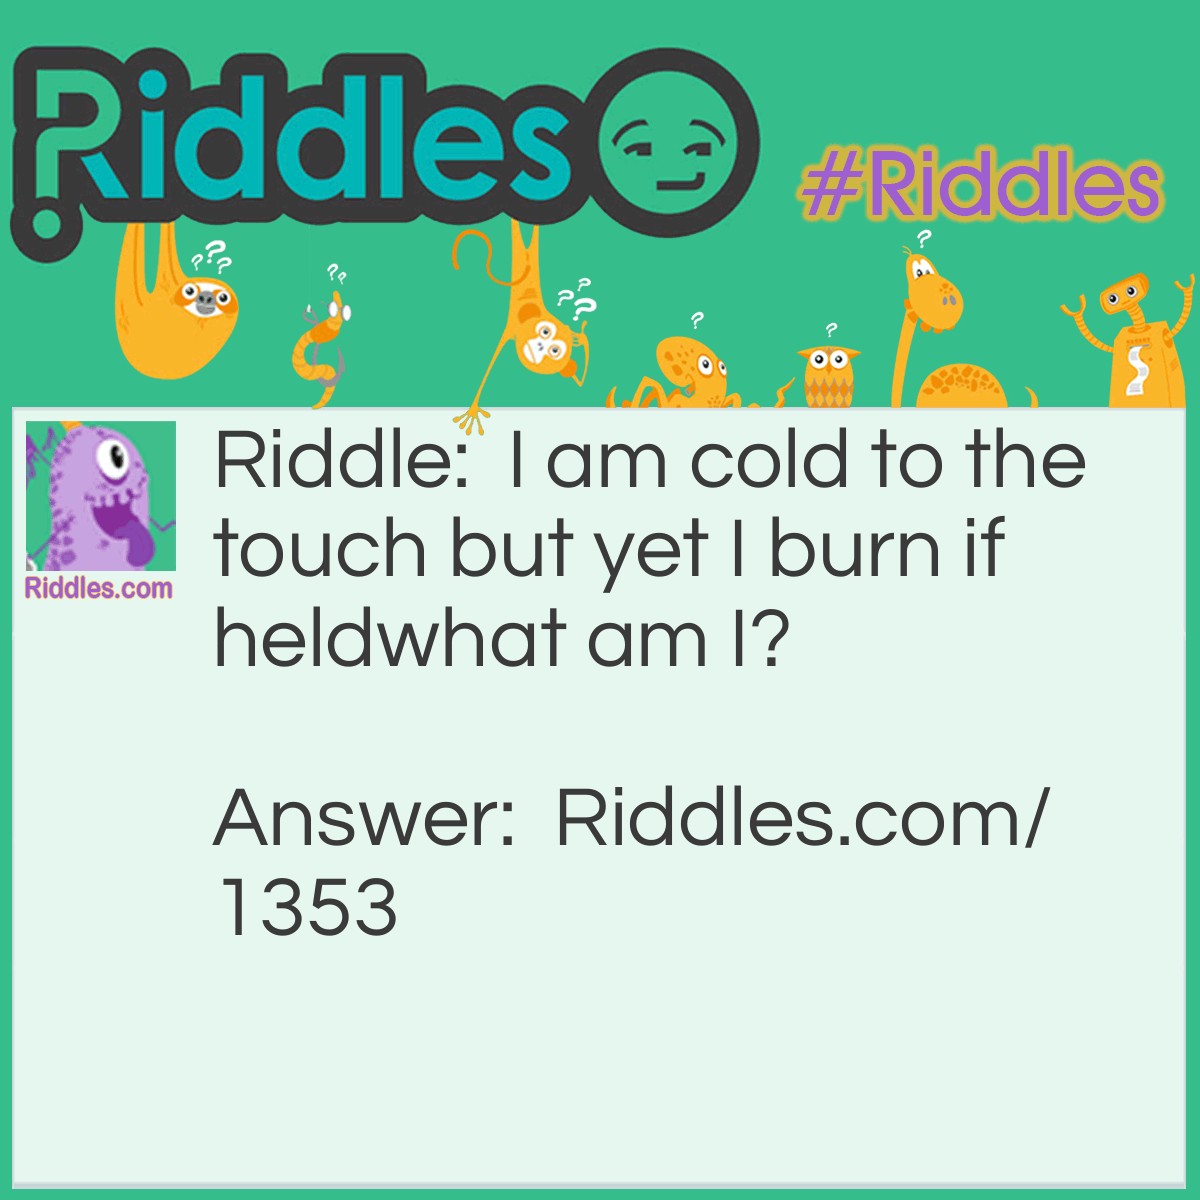 Riddle: I am cold to the touch but yet I burn if held. 
What am I? Answer: I am dry ice. Dry ice is frozen, solid, carbon dioxide that freezes at <span style="caret-color: #202122; color: #202122; font-family: sans-serif; font-size: 14px; font-style: normal; font-variant-caps: normal; font-weight: normal; letter-spacing: normal; orphans: auto; text-align: start; text-indent: 0px; text-transform: none; white-space: normal; widows: auto; word-spacing: 0px; -webkit-text-size-adjust: auto; -webkit-text-stroke-width: 0px; background-color: #ffffff; text-decoration: none; display: inline !important; float: none;">−109.2F.  The extreme cold makes it dangerous to handle with bare skin.</span>